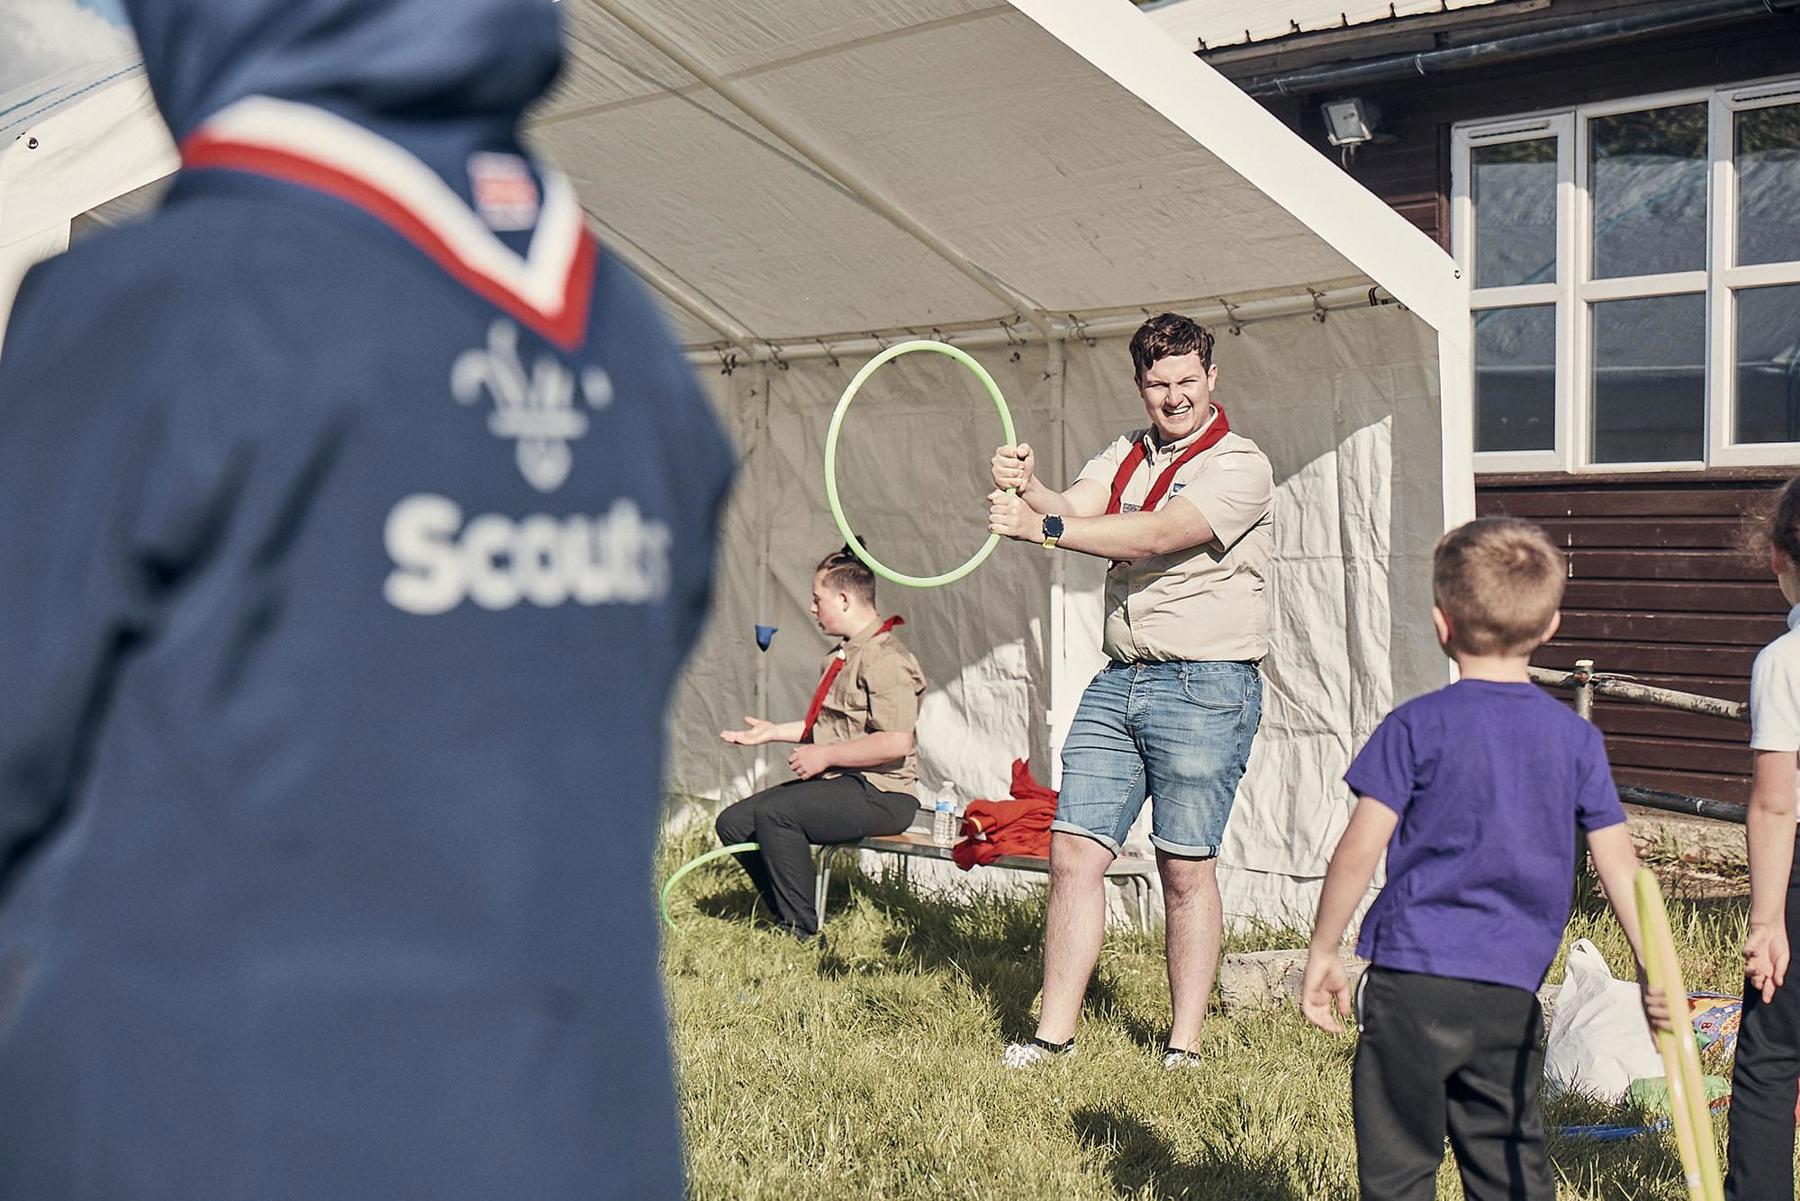 A Scout holds a hoop in the air with a young boy in a purple t shirt looks ready to throw something through it. They are outside their meeting place on grass and underneath a marquee.